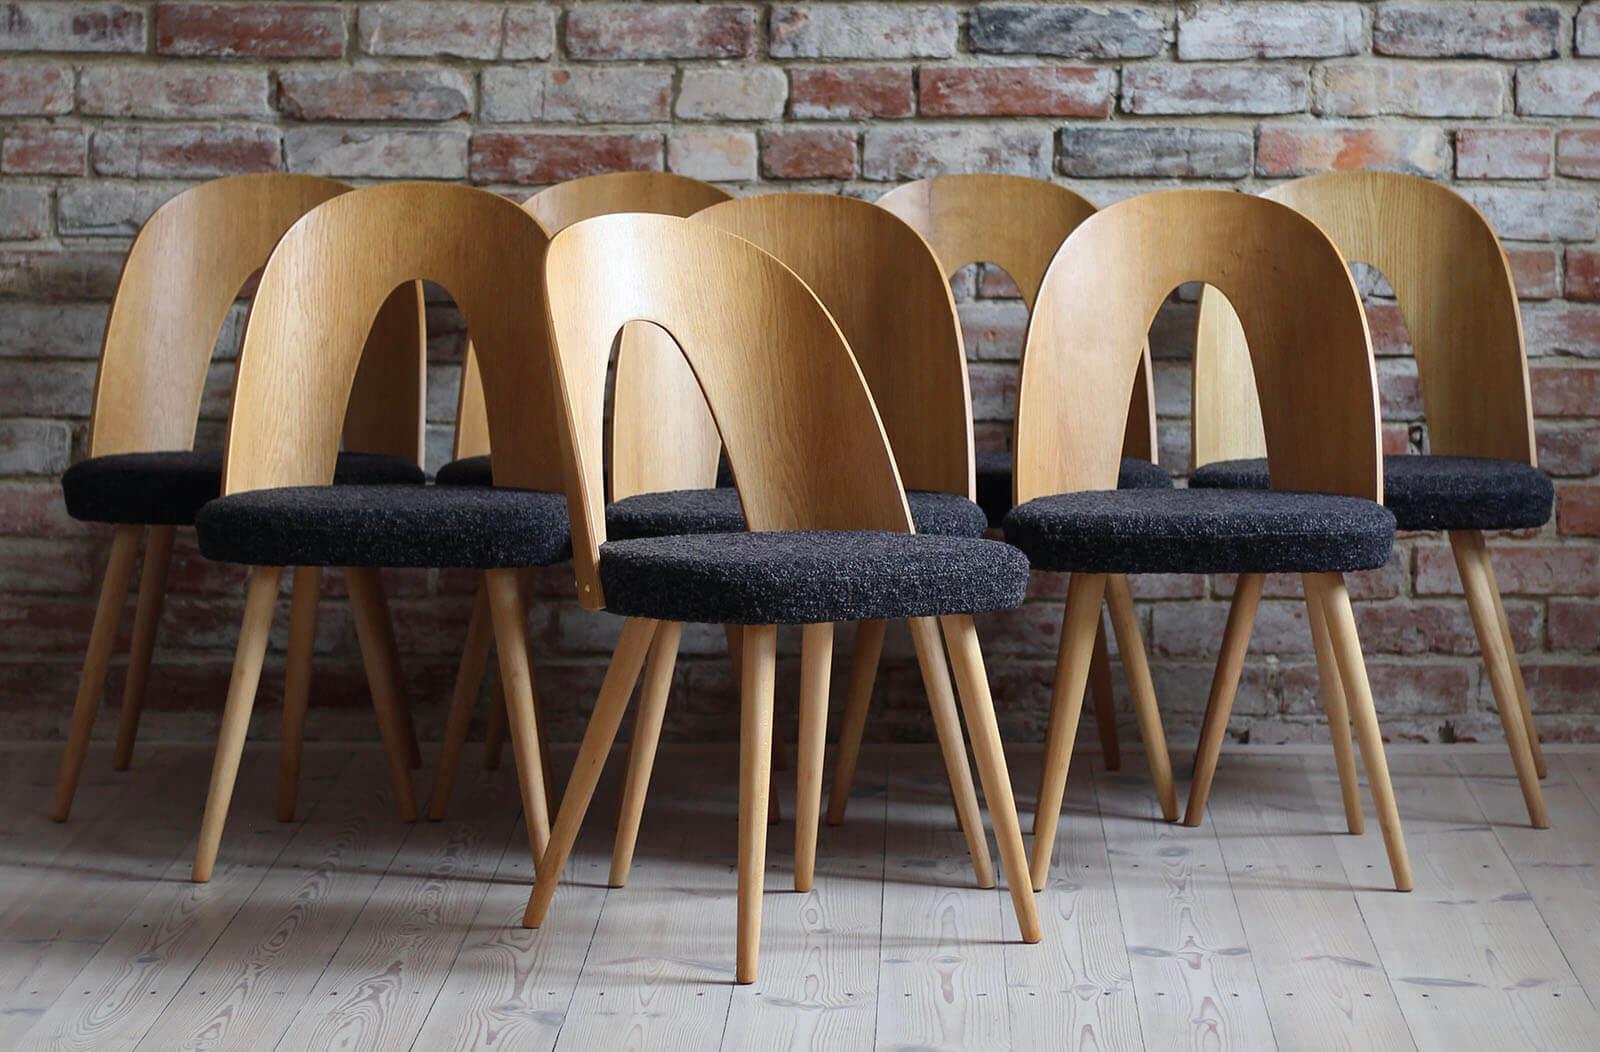 This set of 8 vintage dining chairs was designed by Czech designer Antonin Šuman in the 1960s. The chairs have been completely restored finished with high-quality oil that gave them beautiful and natural finish. This set is reupholstered with